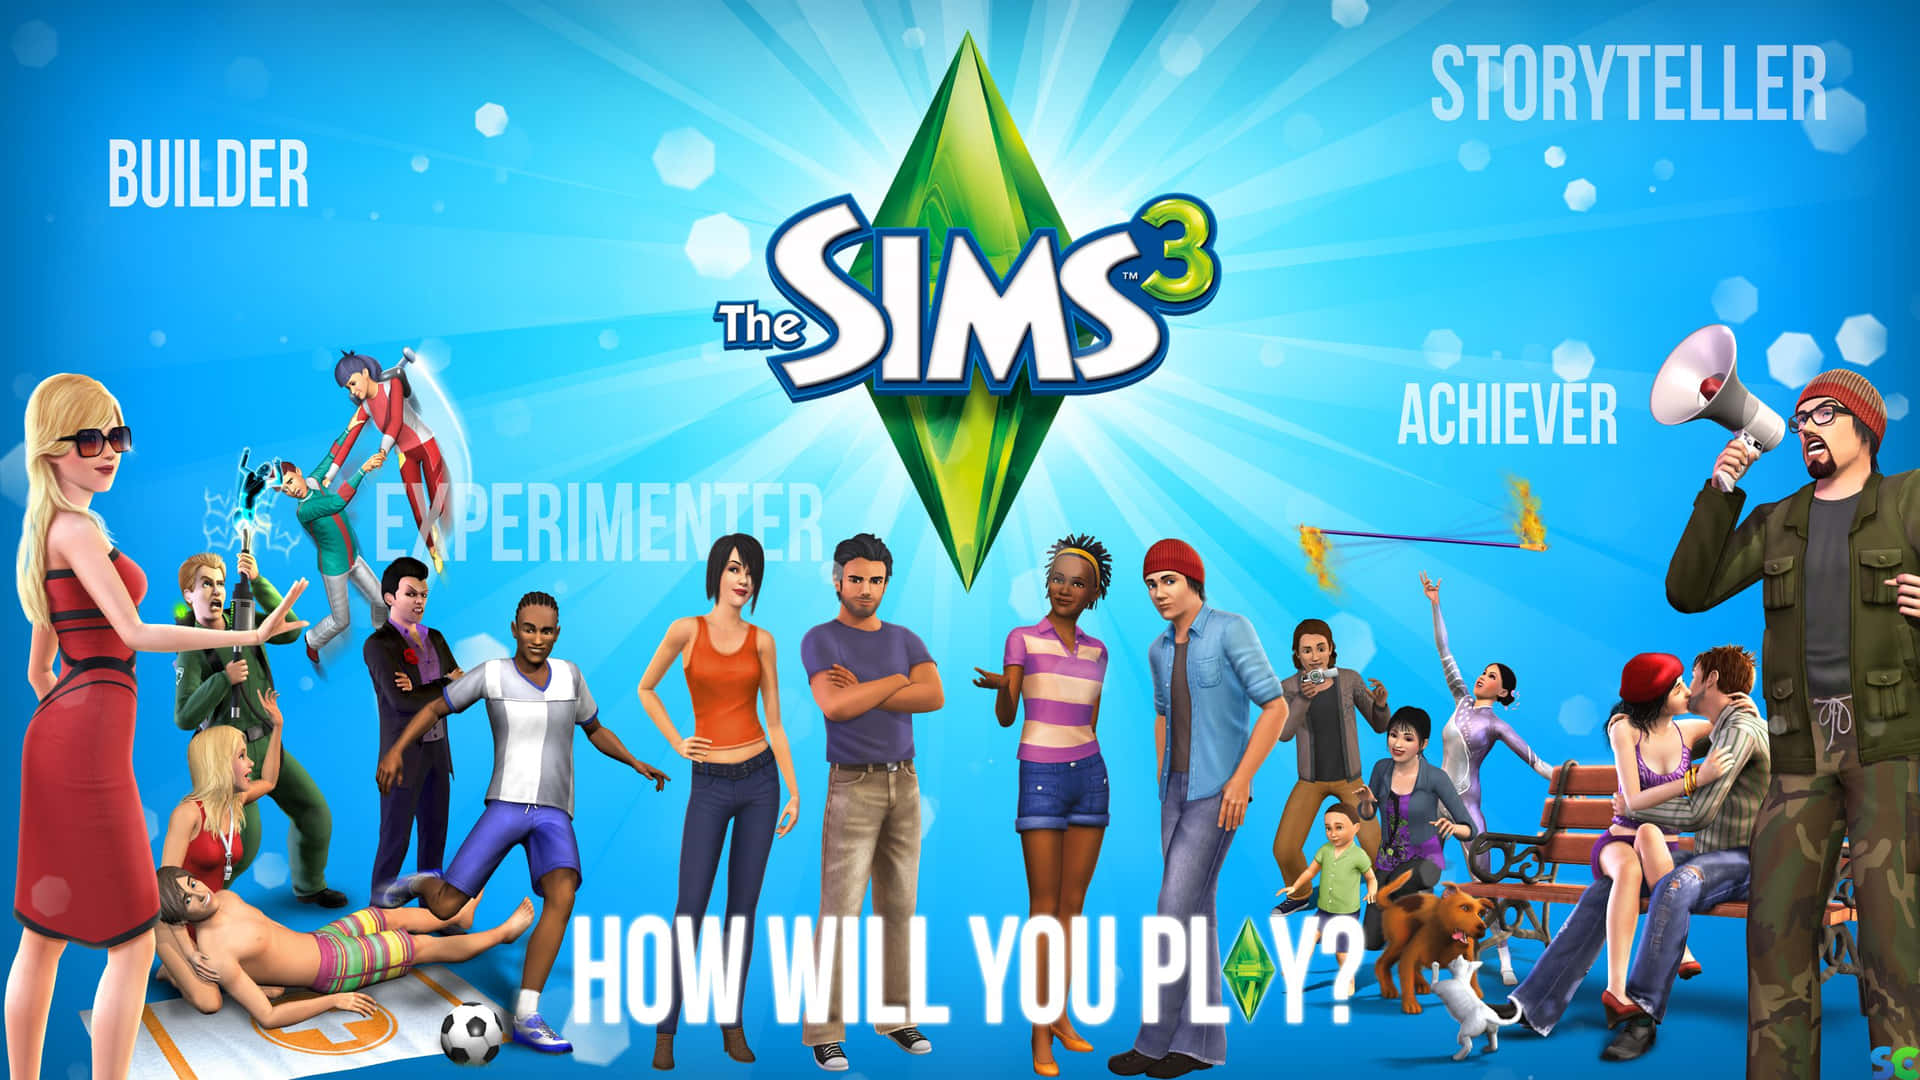 The Sims 3 - How Will You Play? Wallpaper